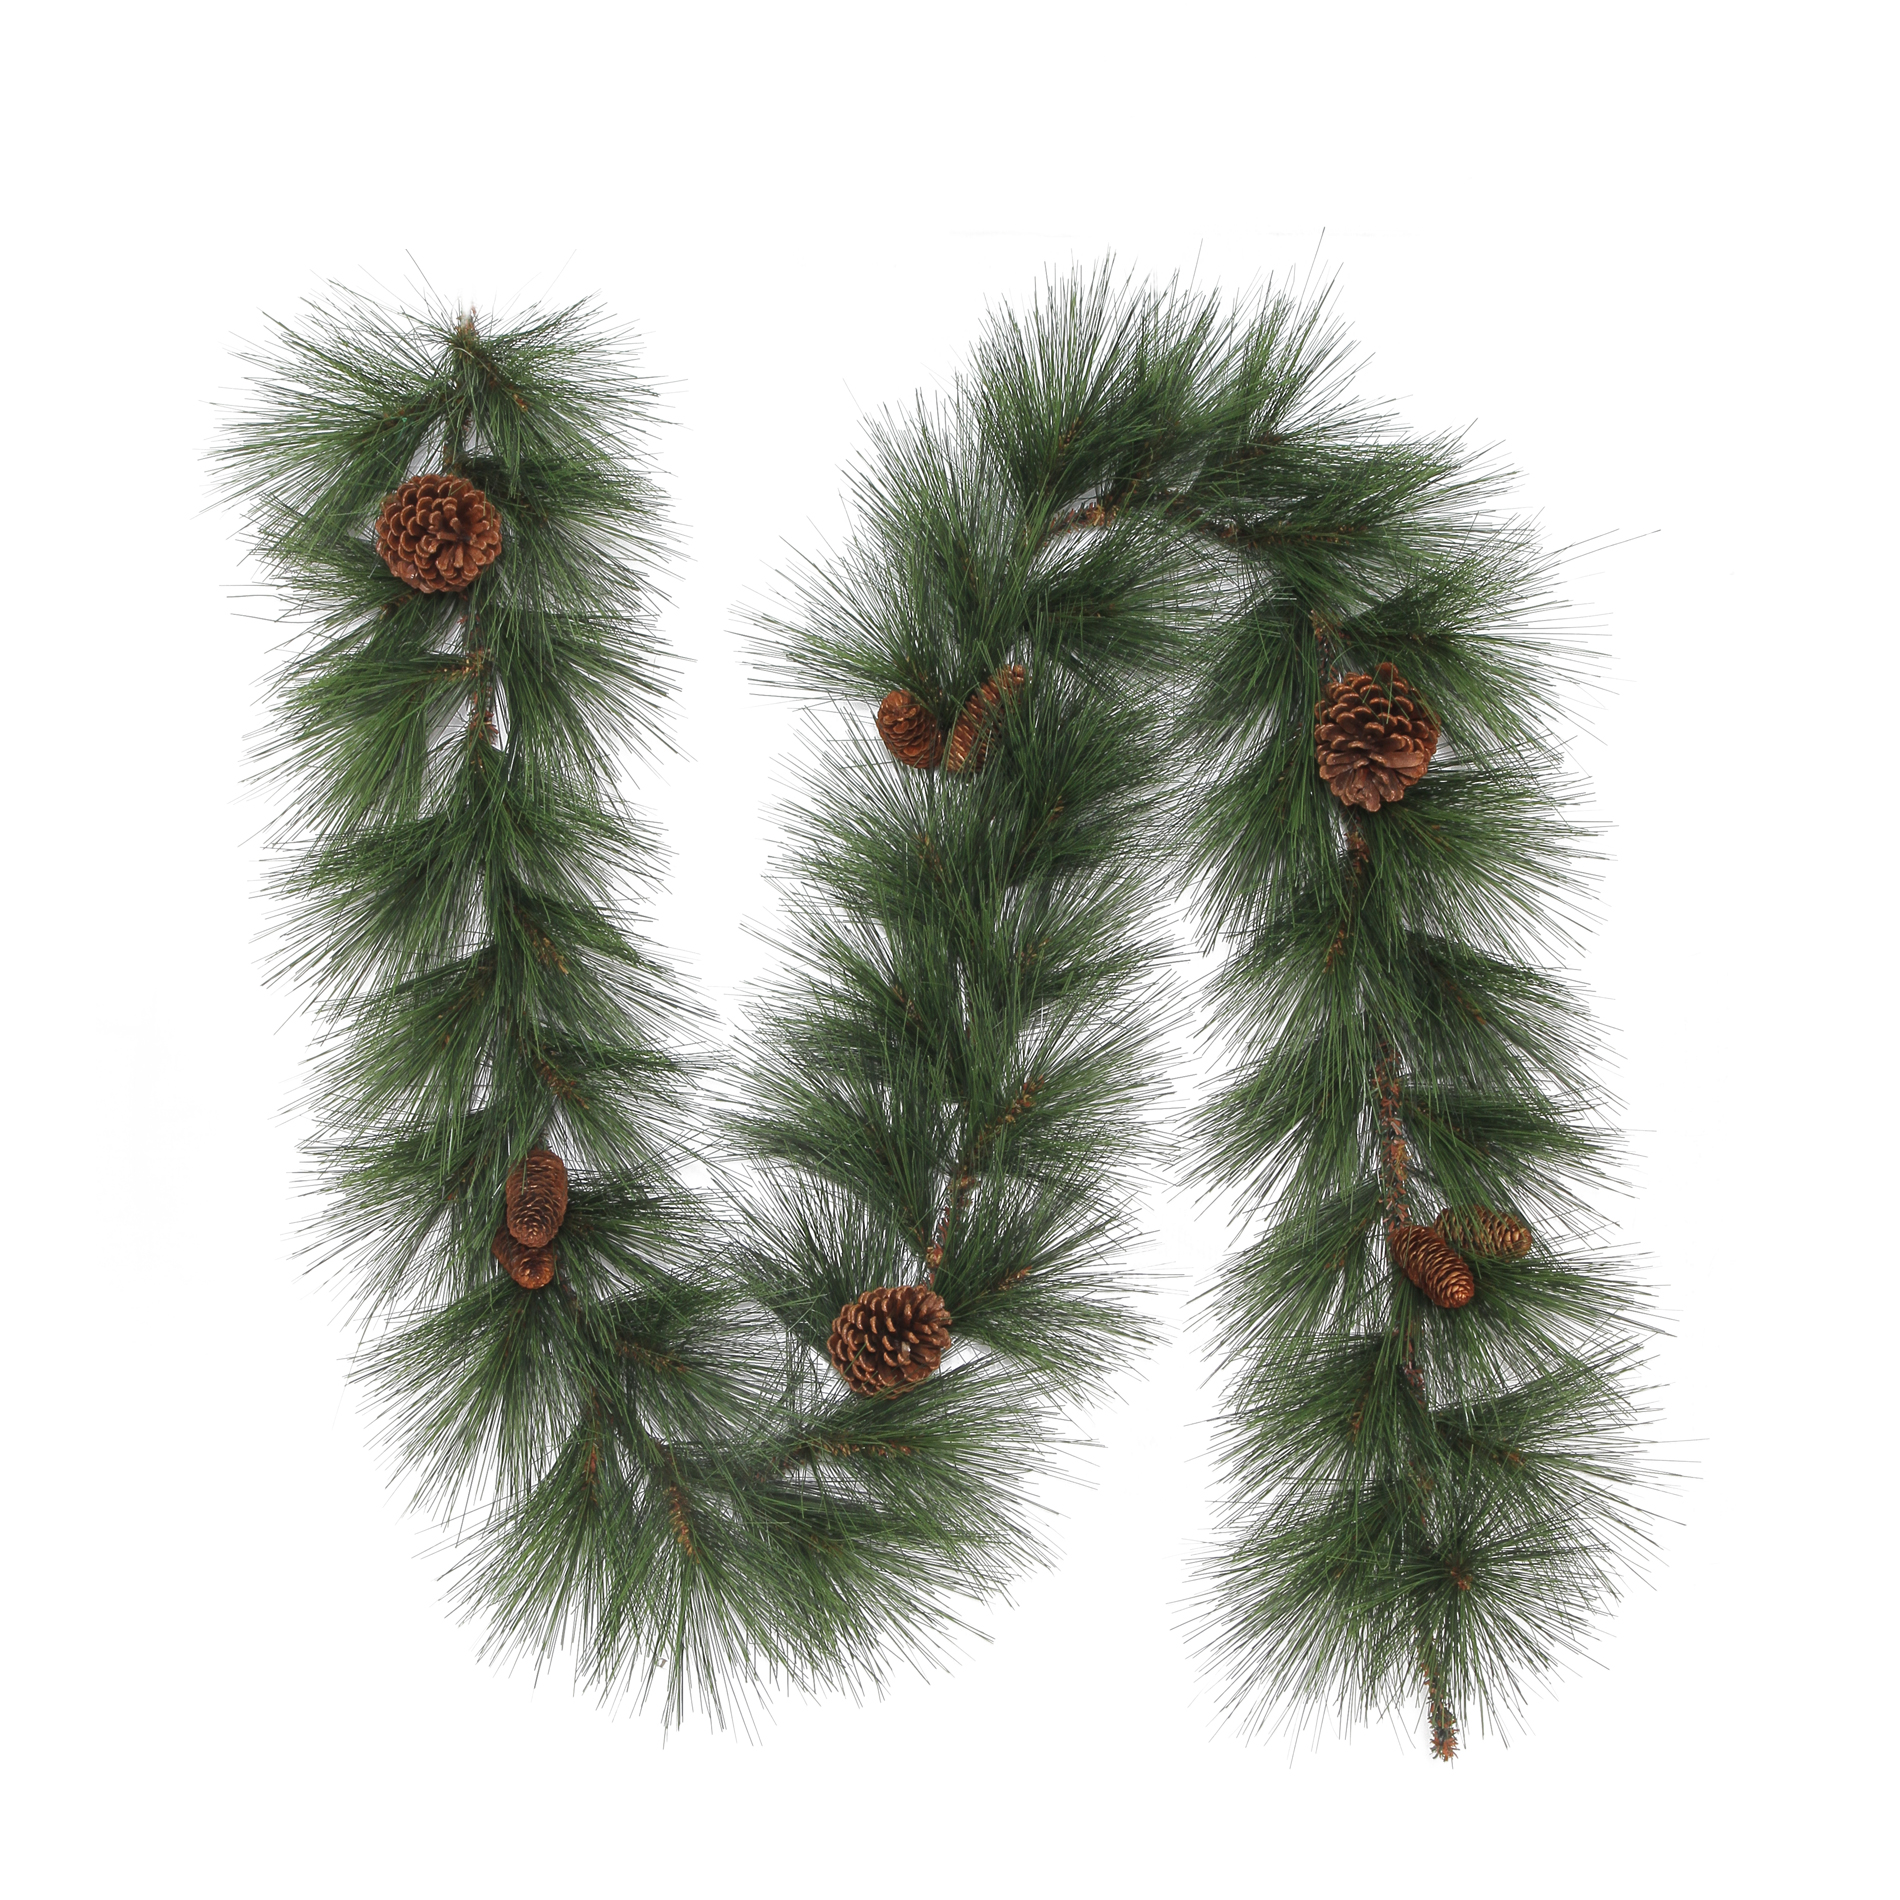 Trimming Traditions Christmas Richardson Long Needle Garland with Pinecones, 9 ft